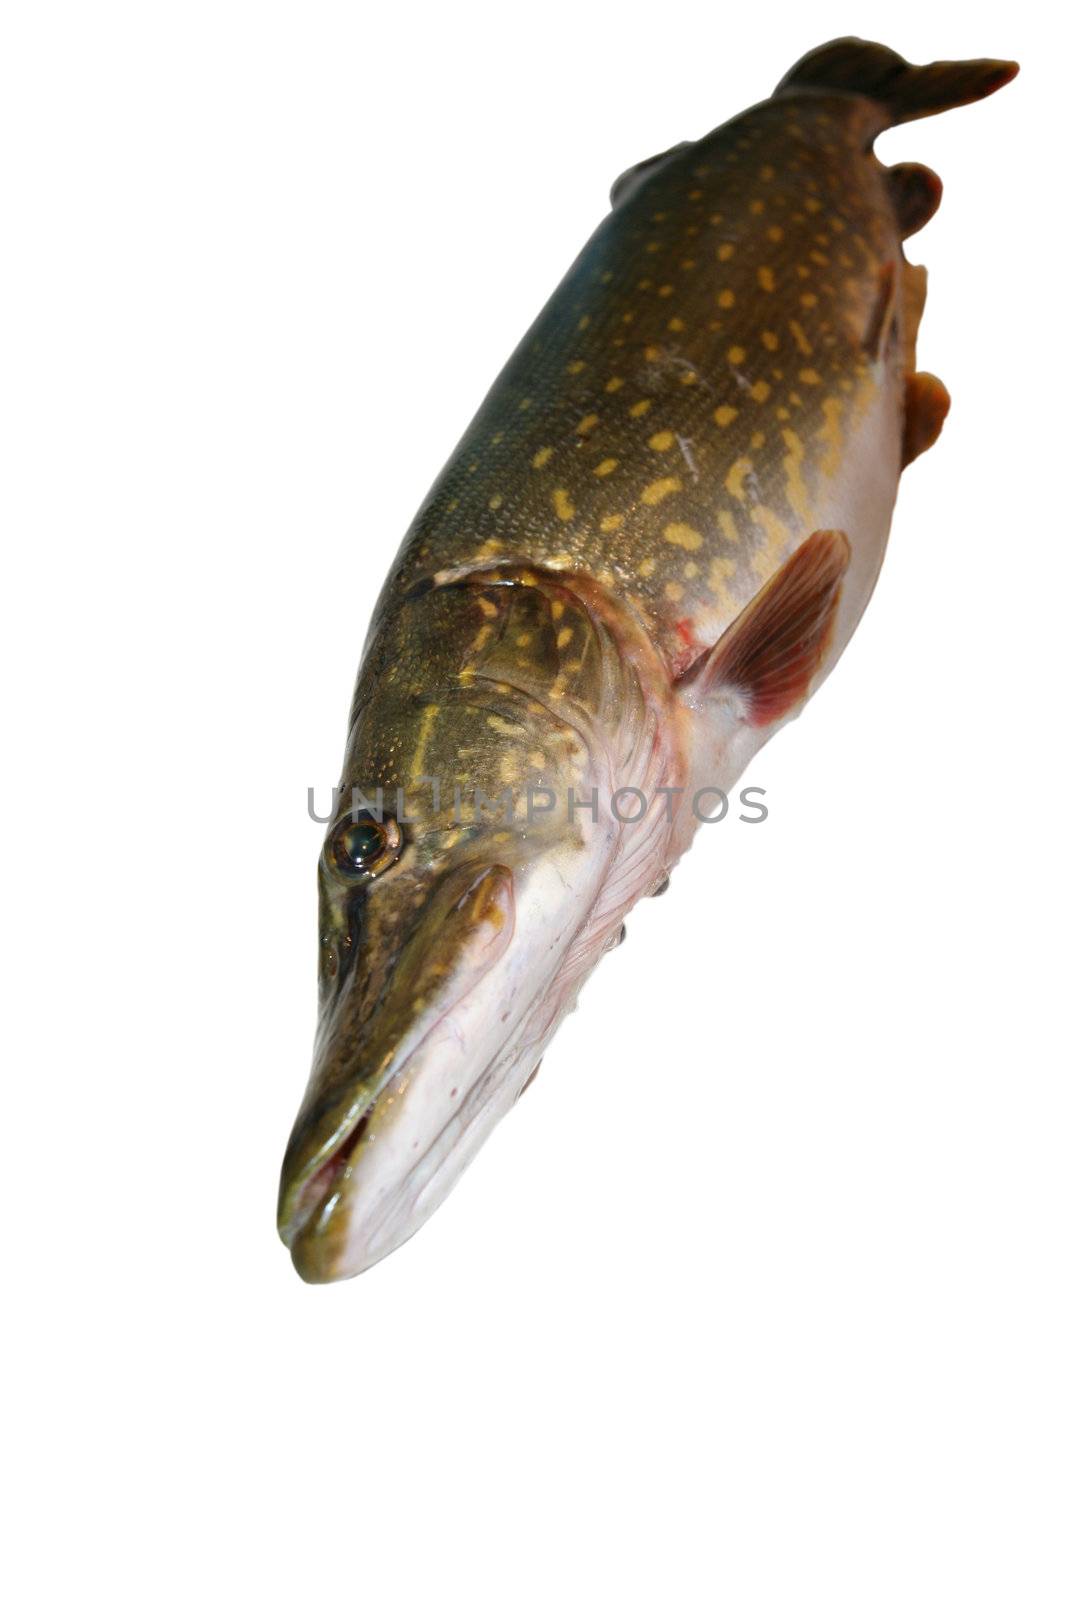 Raw fish (pike). Image series of different food on white background